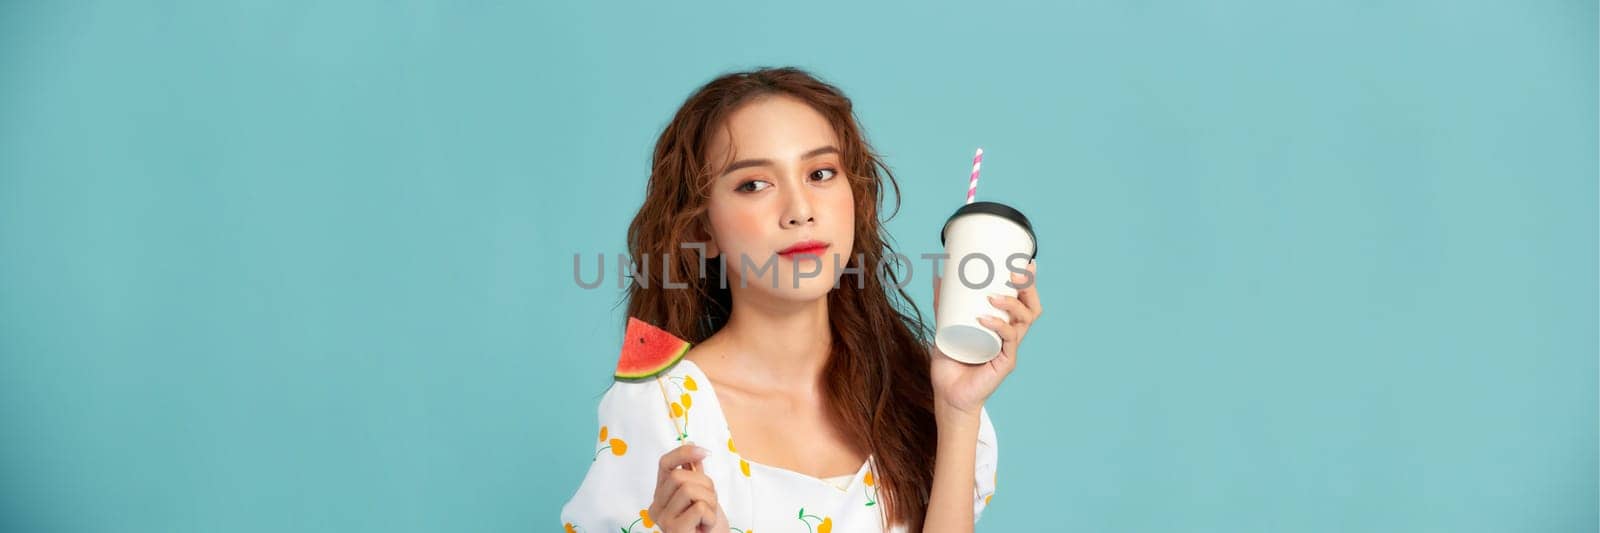 Young woman drinking watermelon juice on blue banner by makidotvn